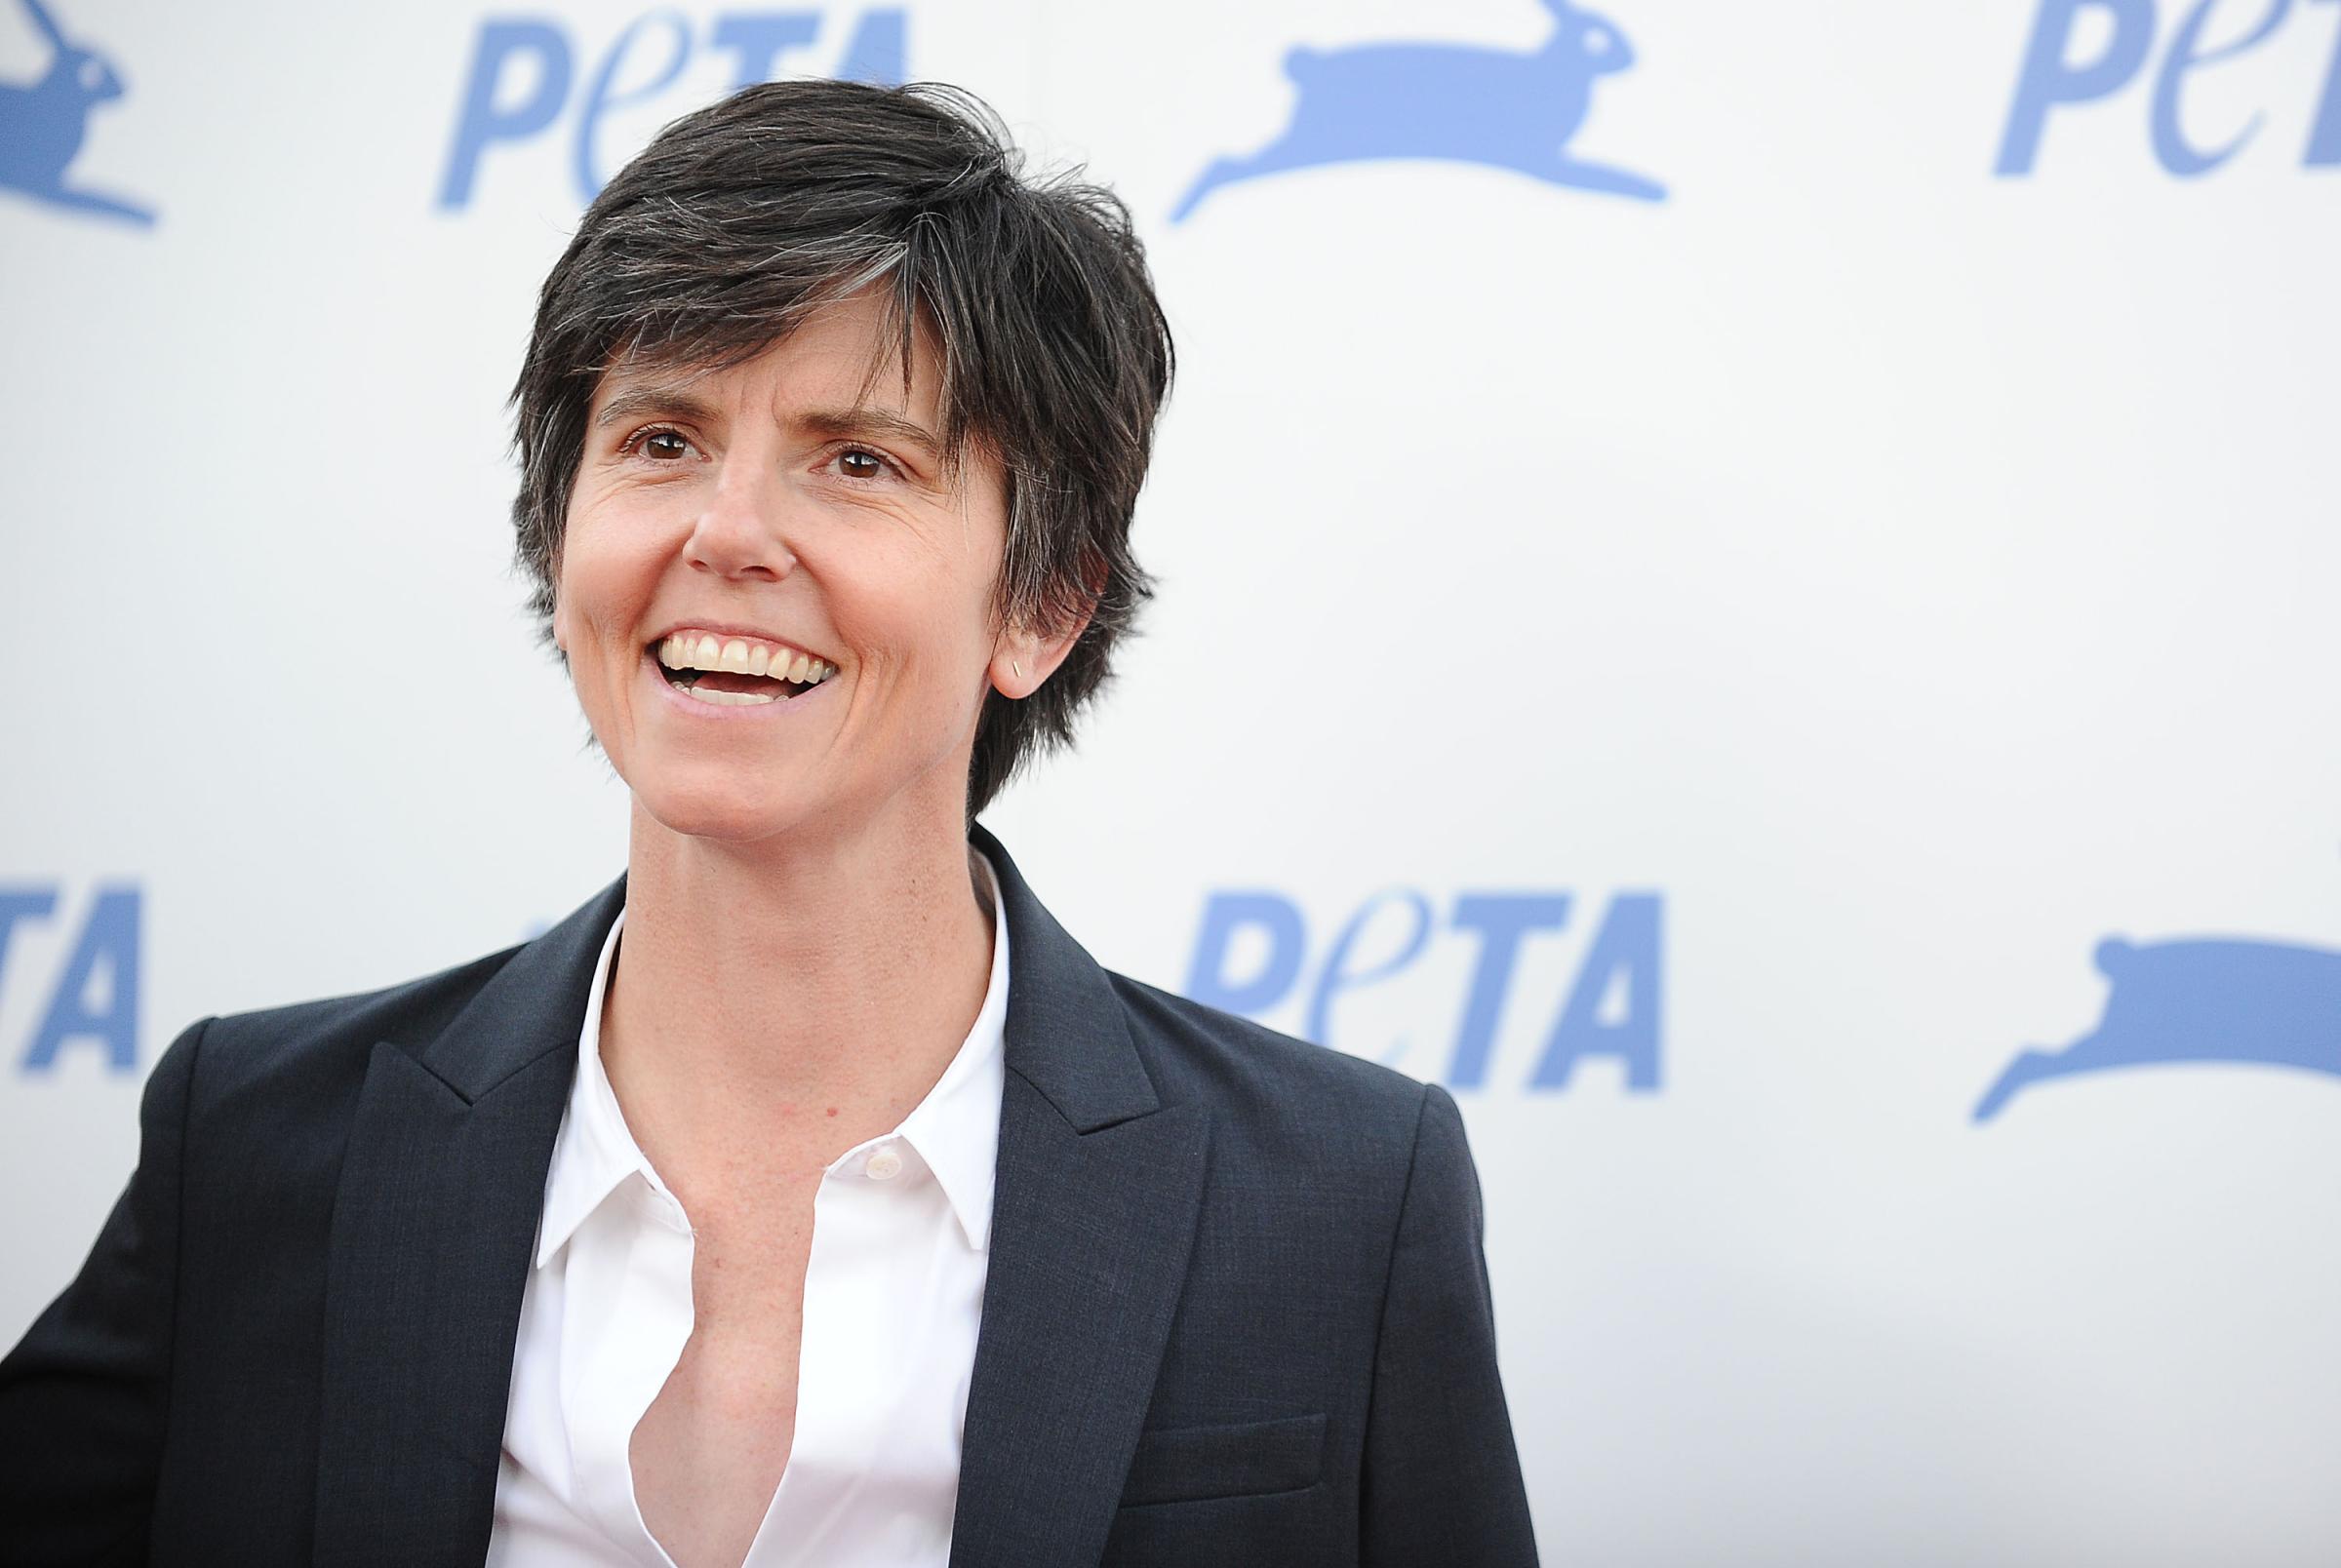 Tig Notaro attends PETA's 35th anniversary party at Hollywood Palladium in Los Angeles on Sep. 30, 2015.